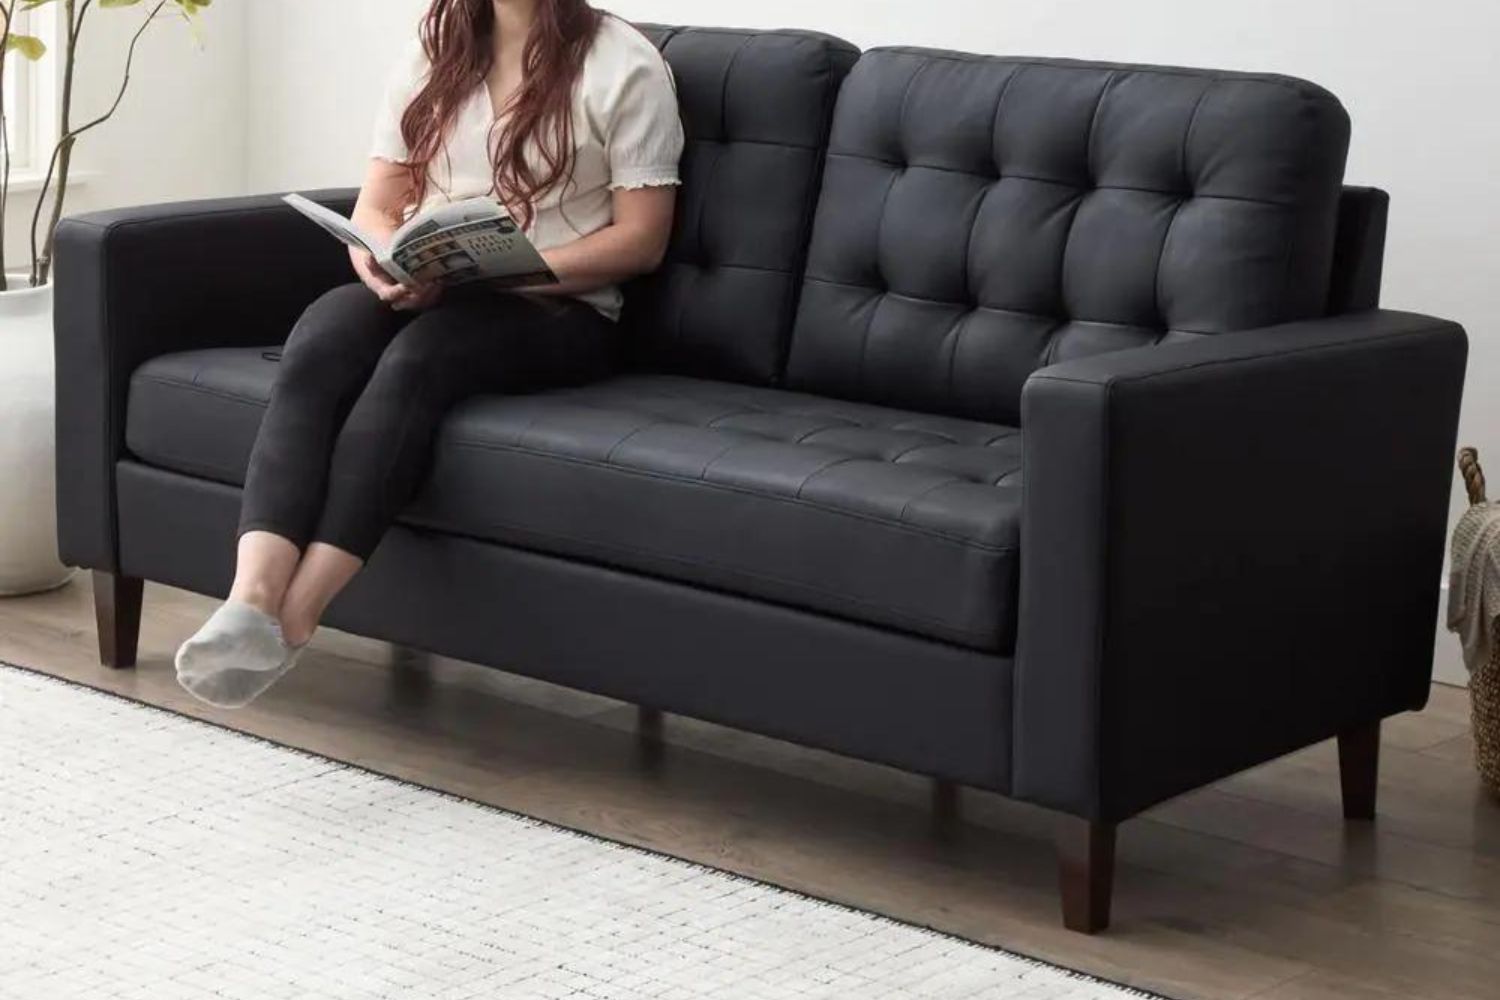 Sofas Under $500 Options: Brookside Brynn Black Faux Leather Upholstered Sofa